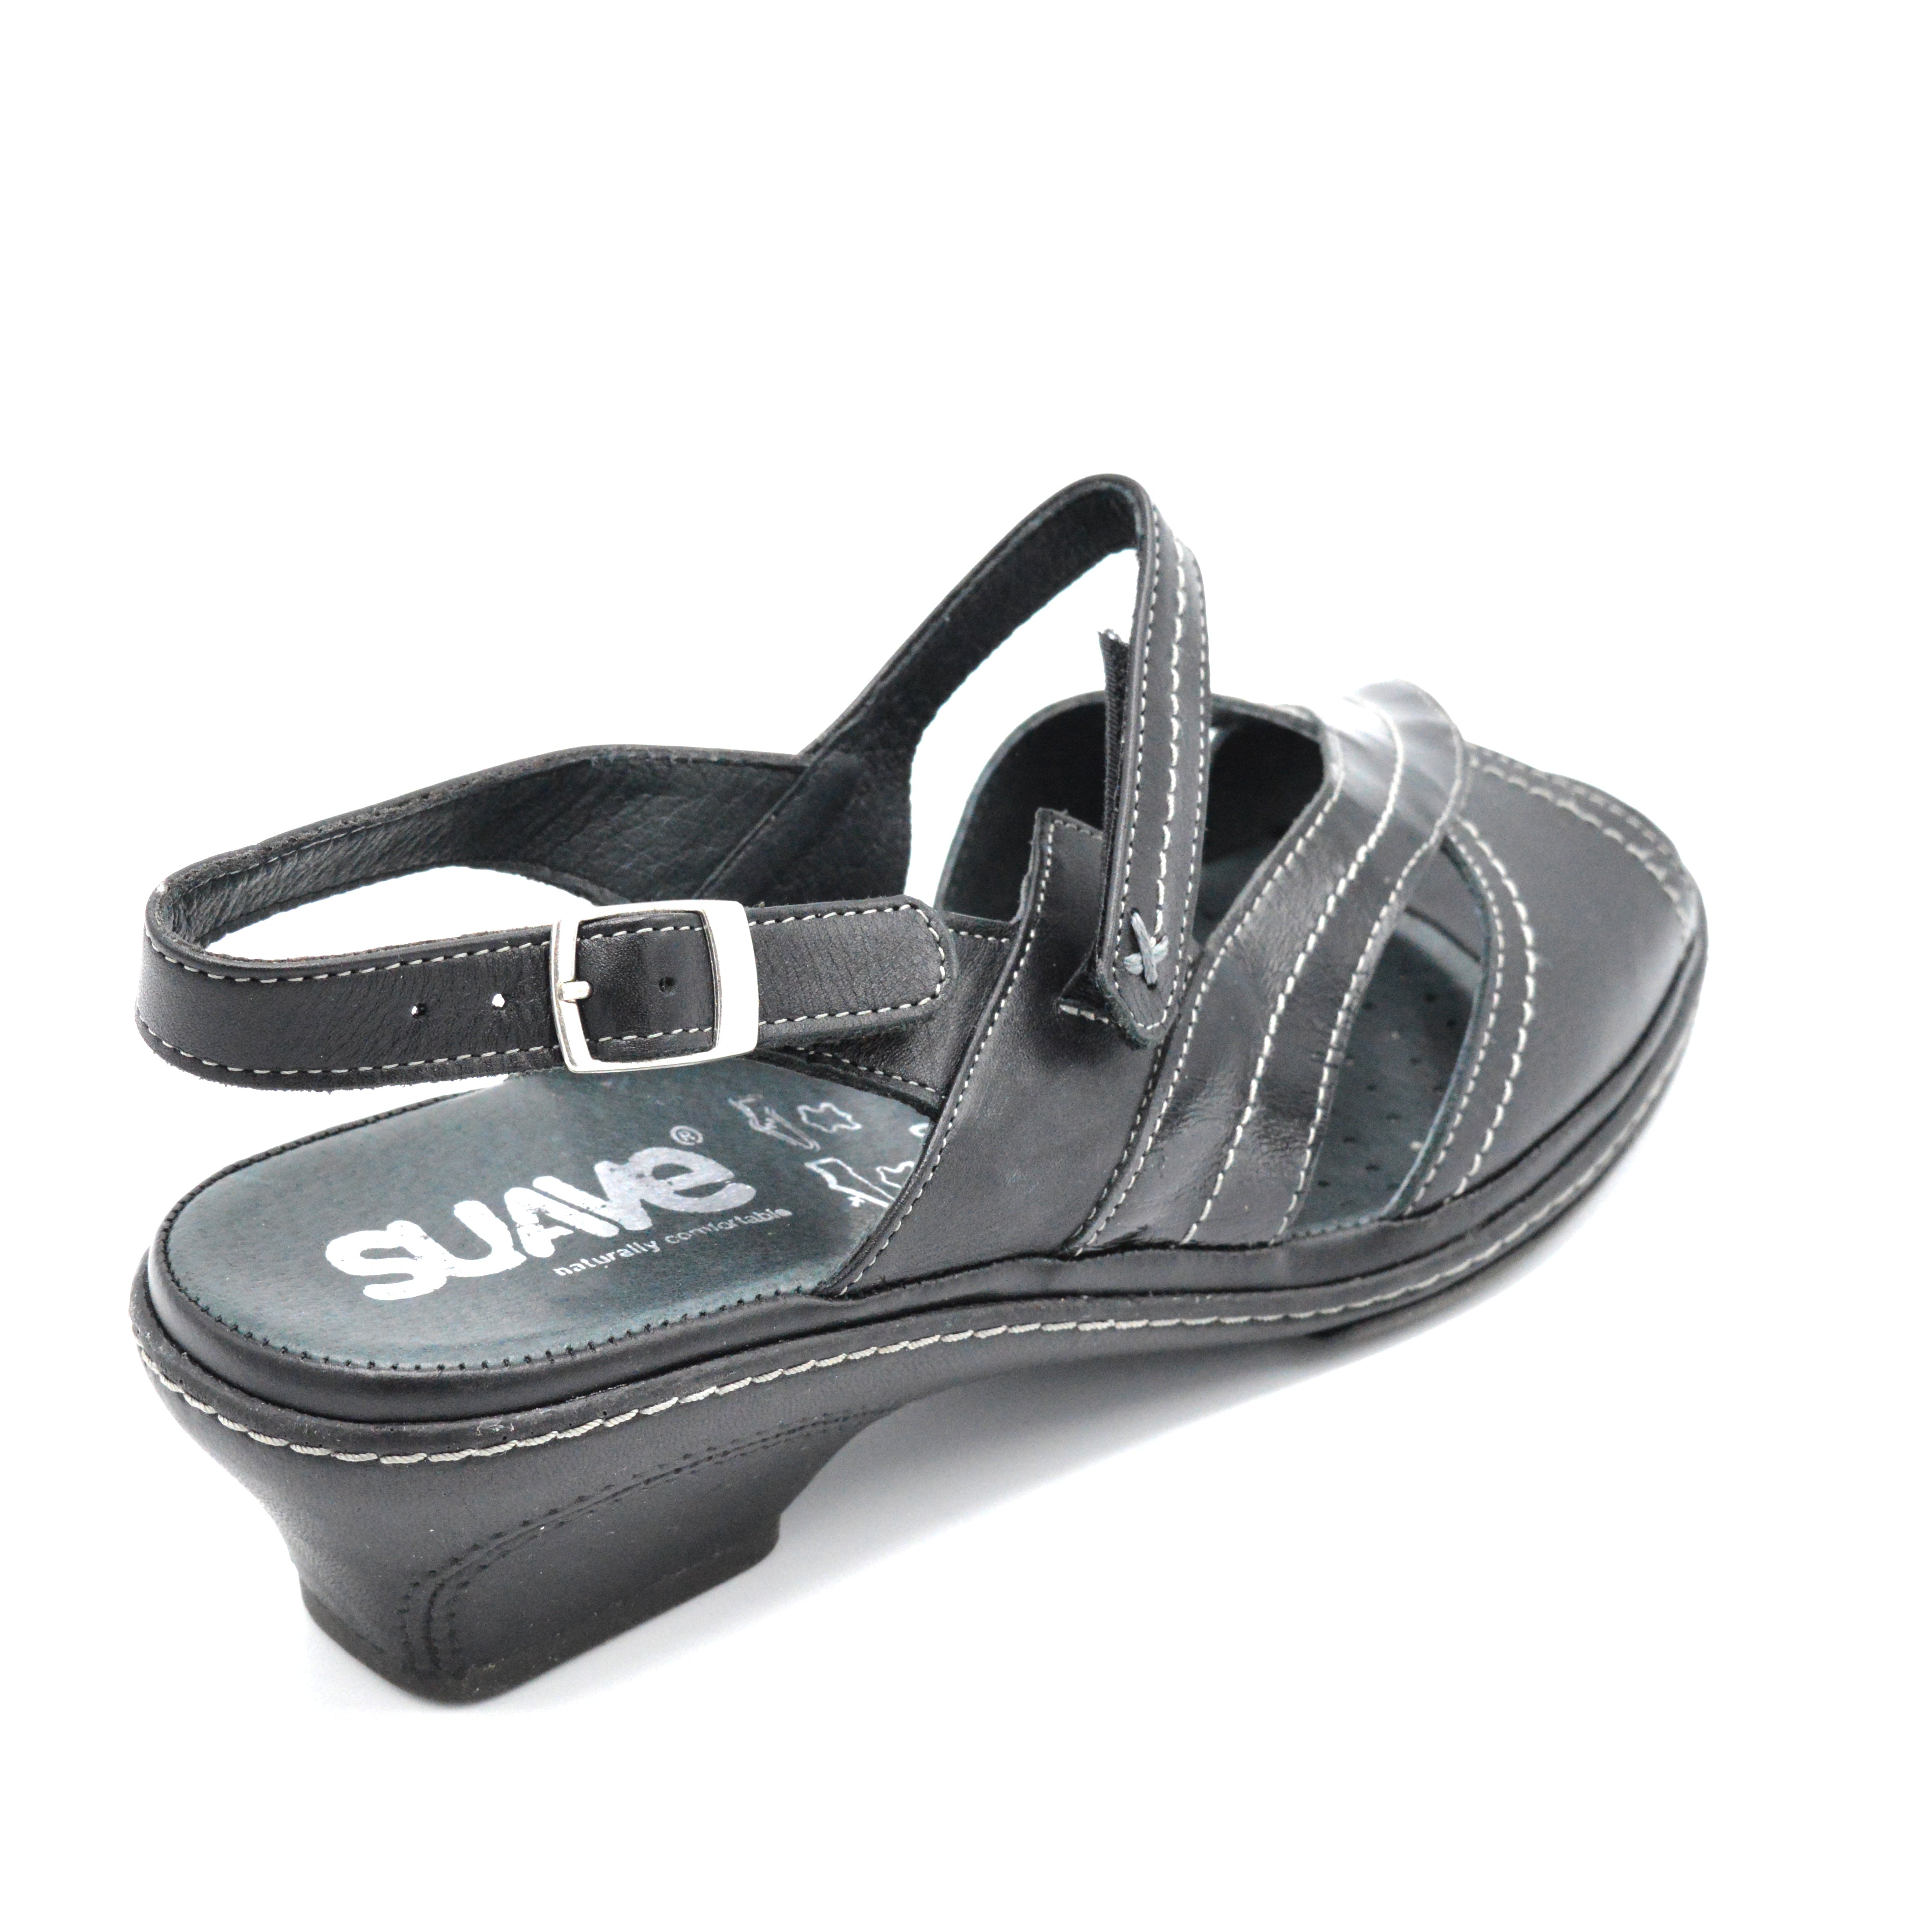 Eden by Suave - Wide Fit Evening Sandal in Black - 2E Fitting